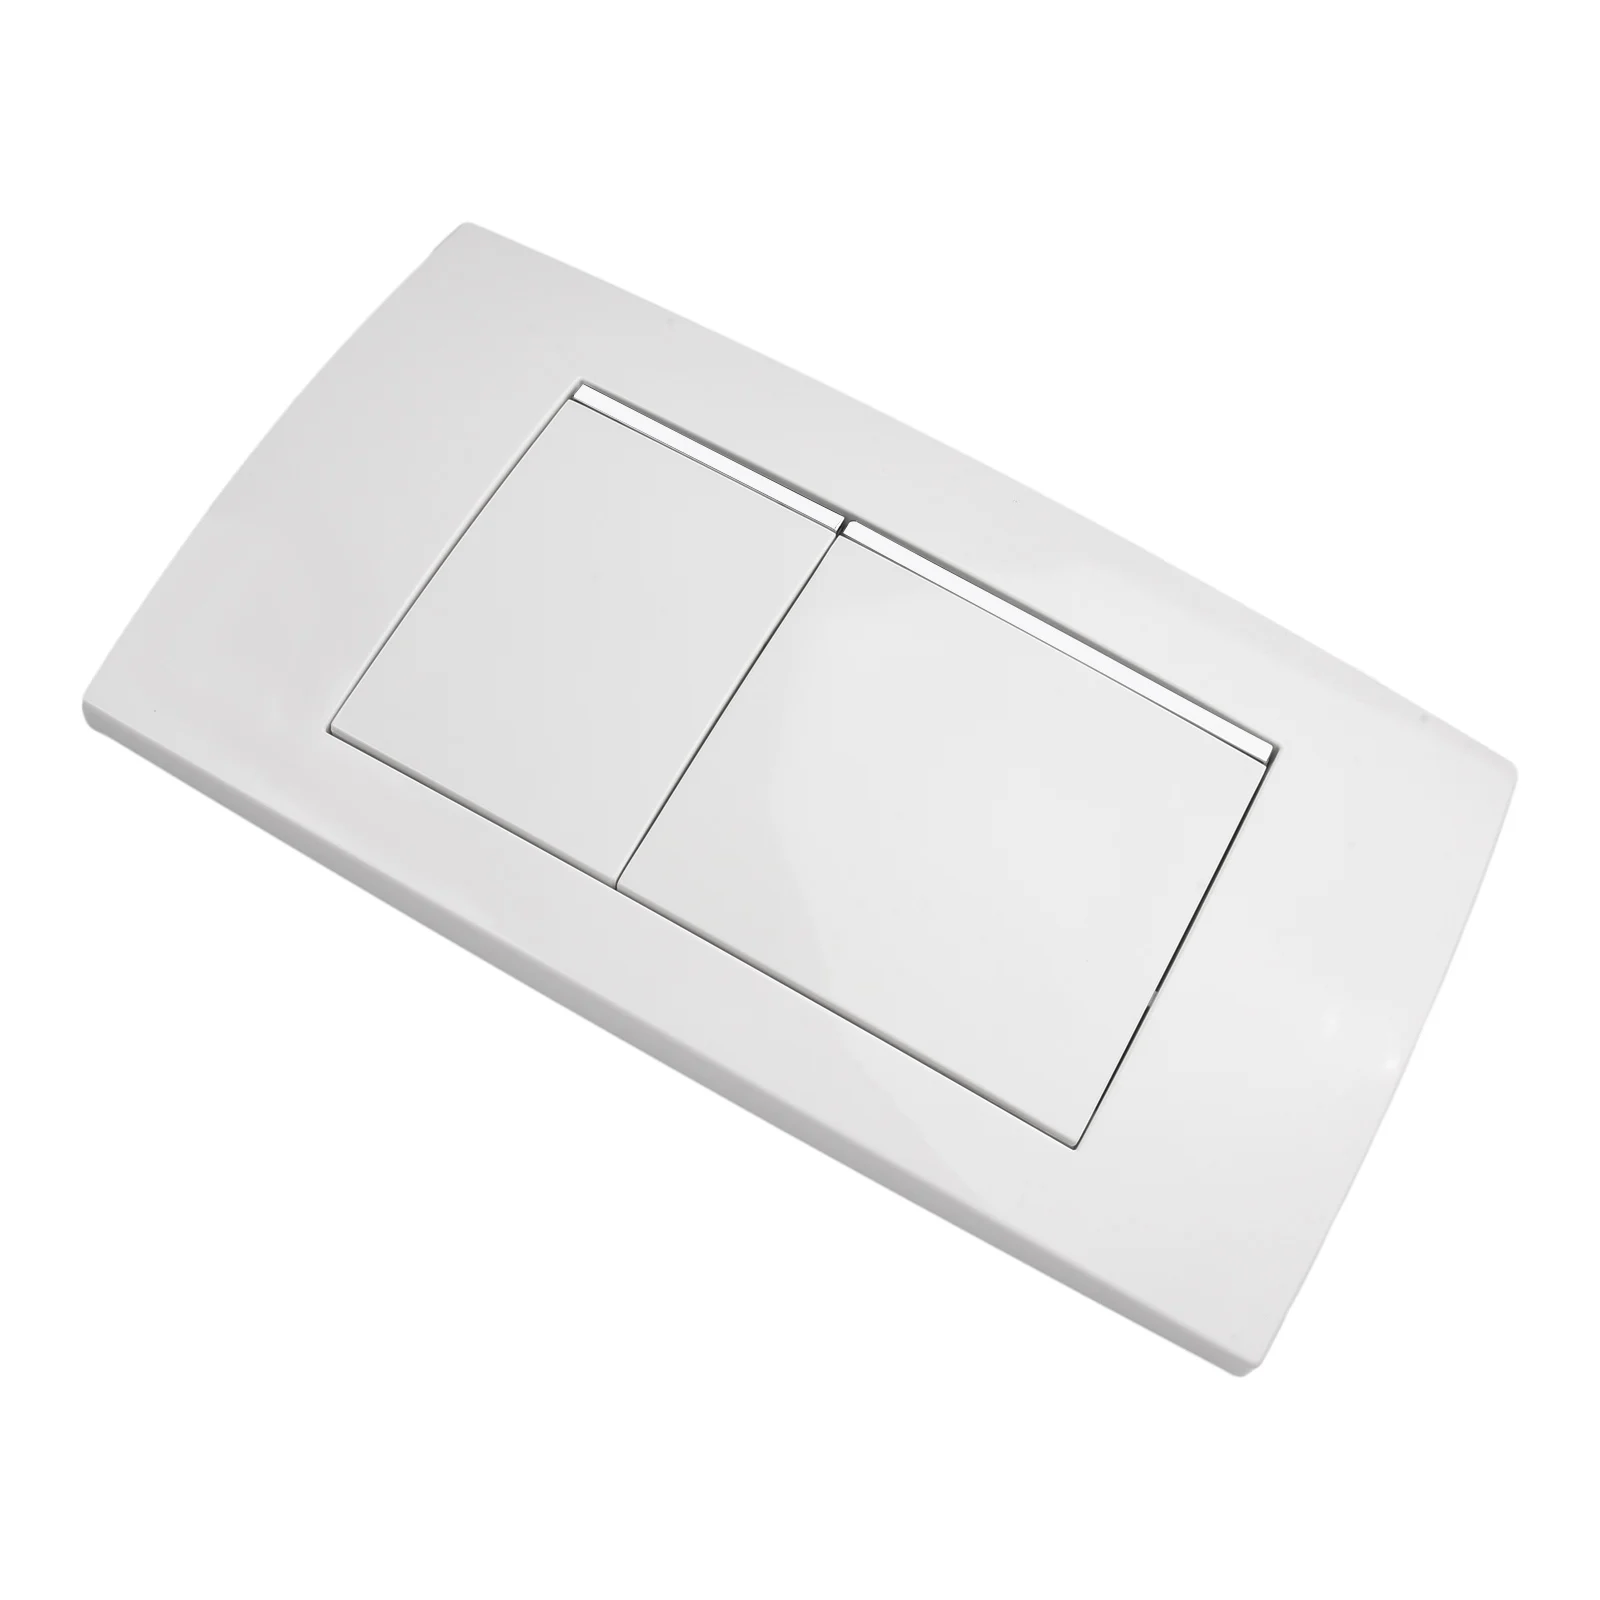 

Button Dual Flush Plate Bathroom Accessories Plastic Press Switch Repair Toilet Water Tank For Geberit Twinline 30